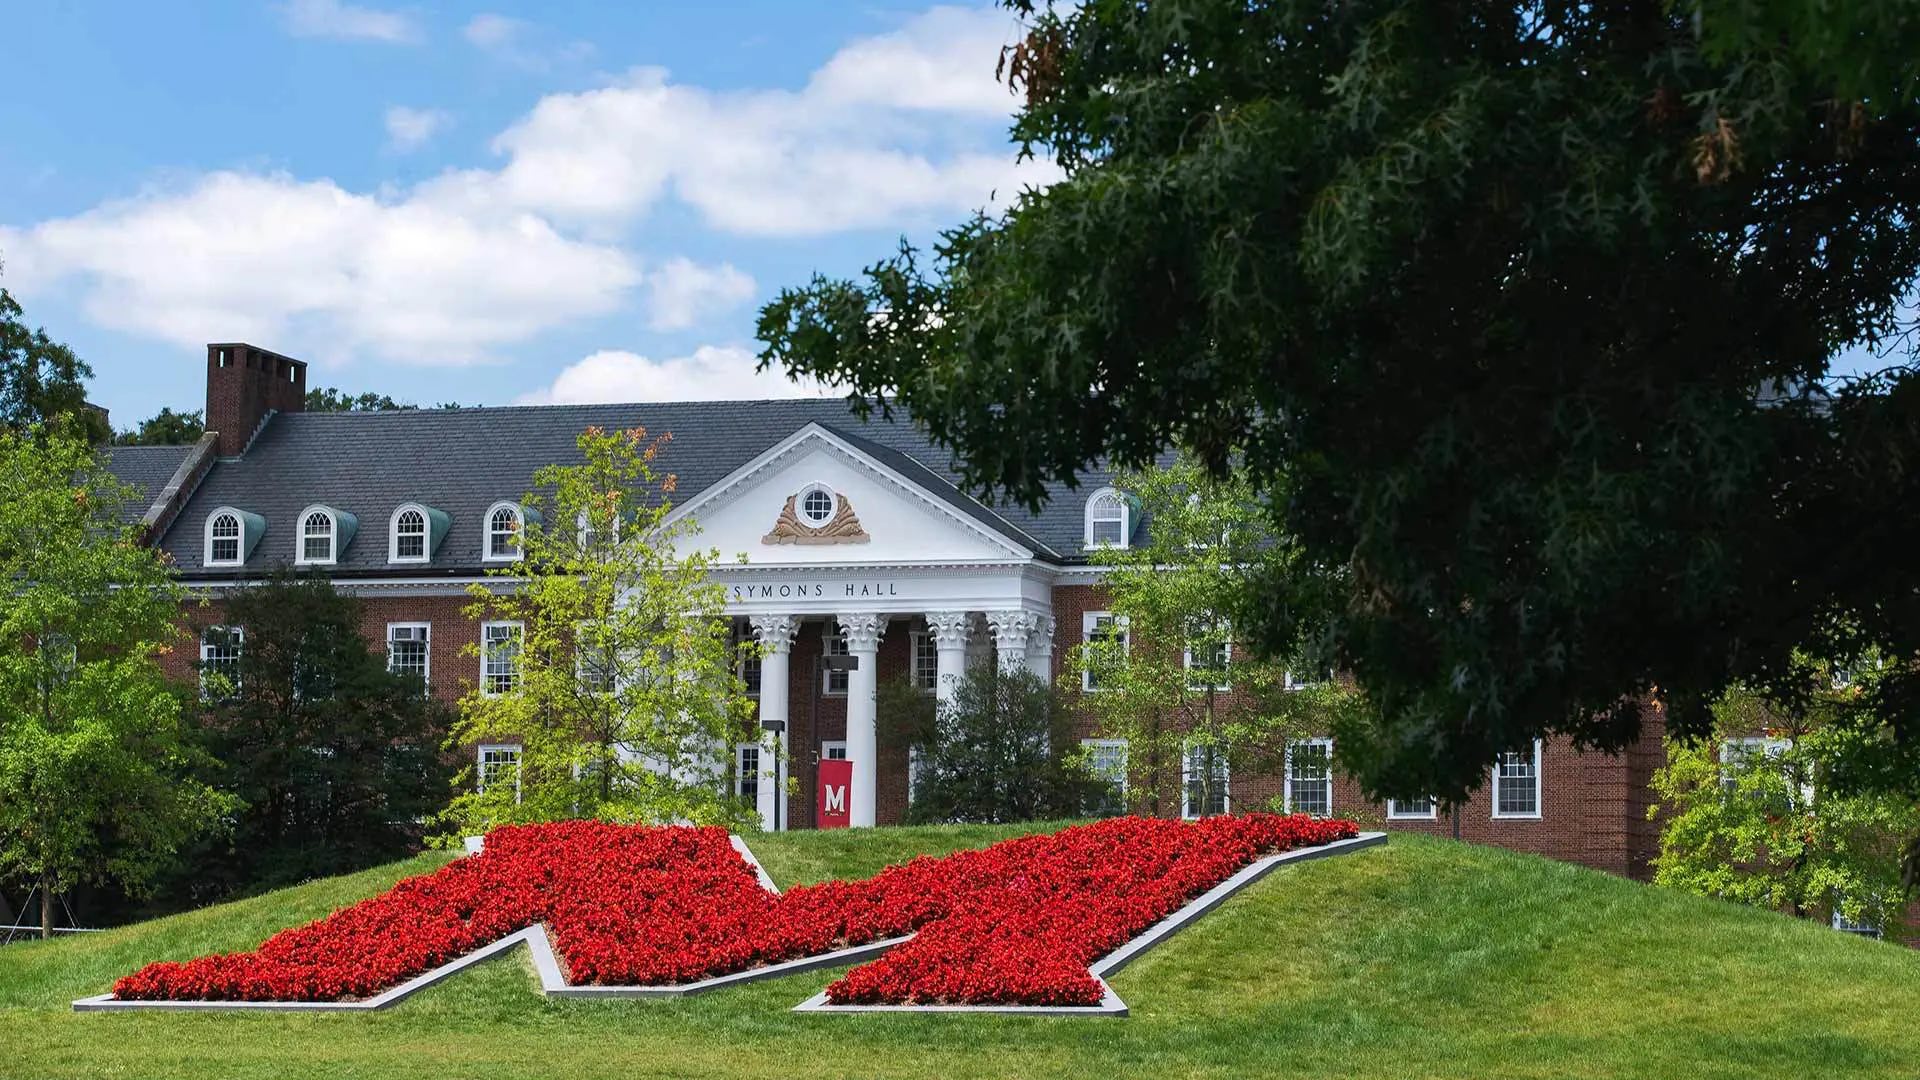 Maryland "M" made via planted flowers in front of Symons Hall on the campus of the University of Maryland, College Park